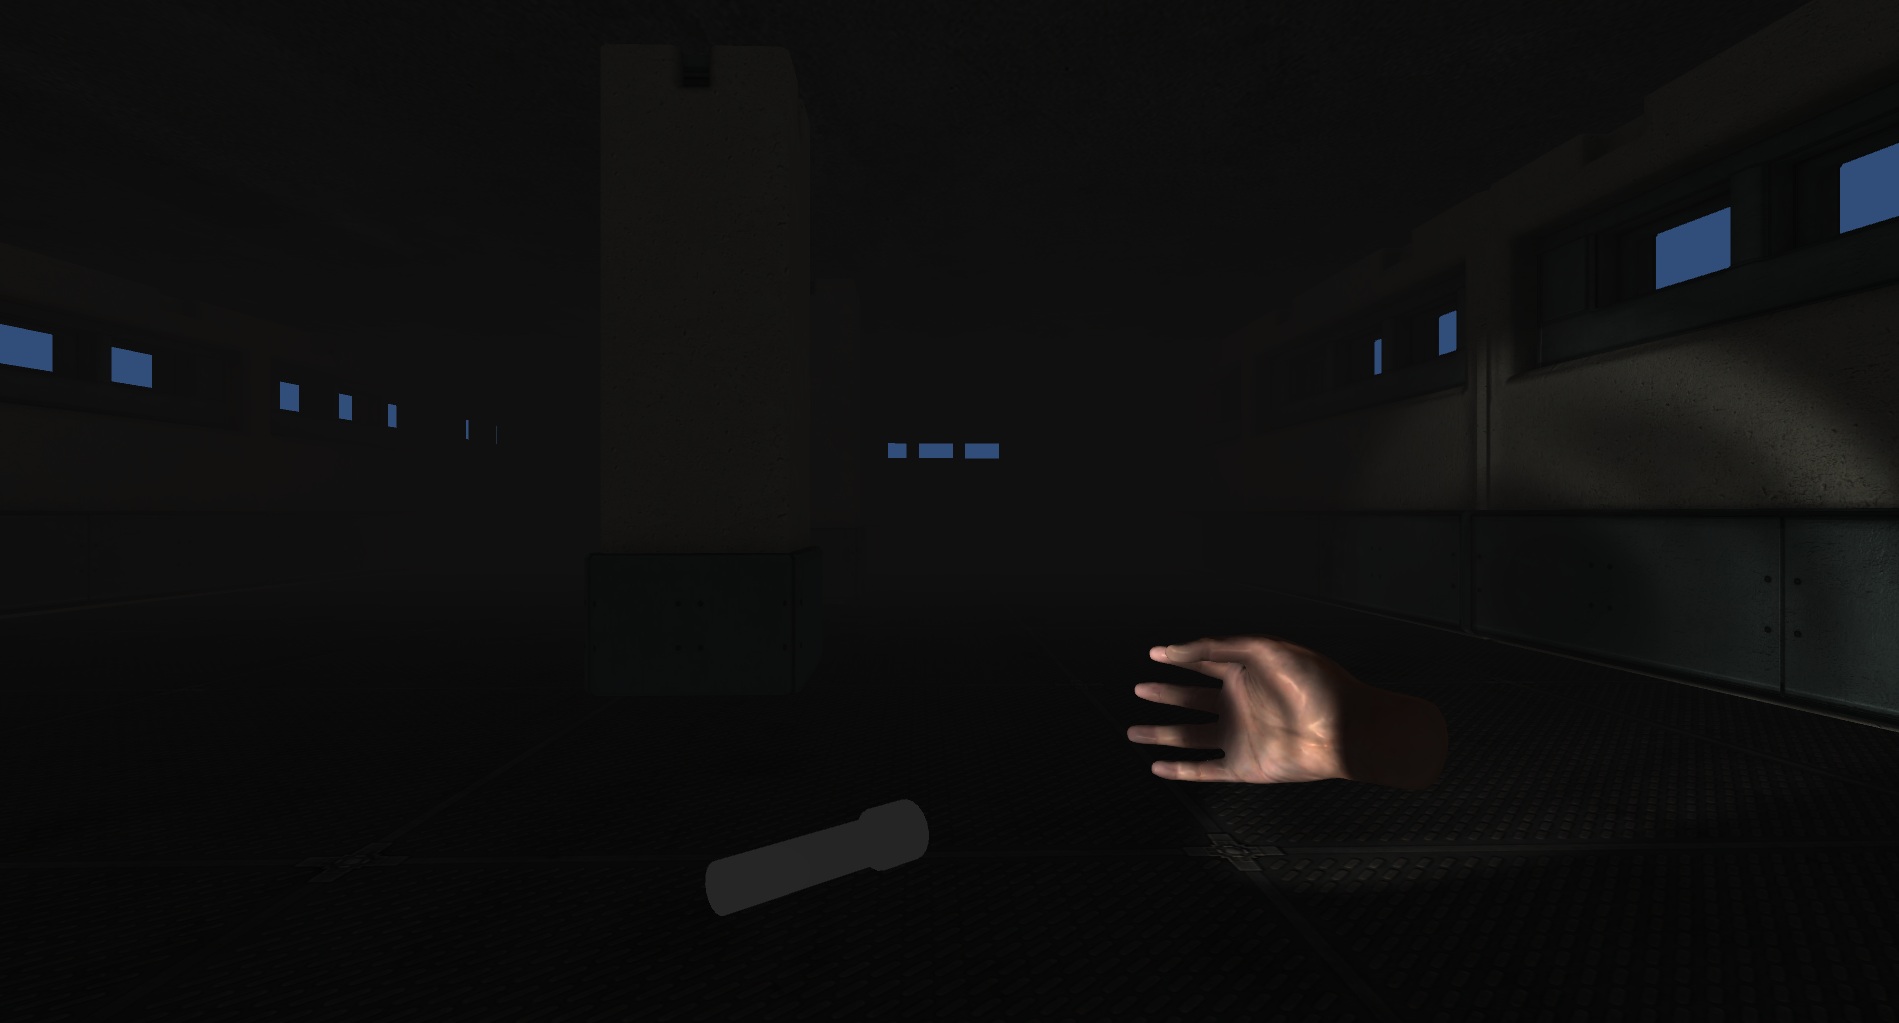 CG Image of a flashlight pointing at a hand. The hand is not throwing a shadow